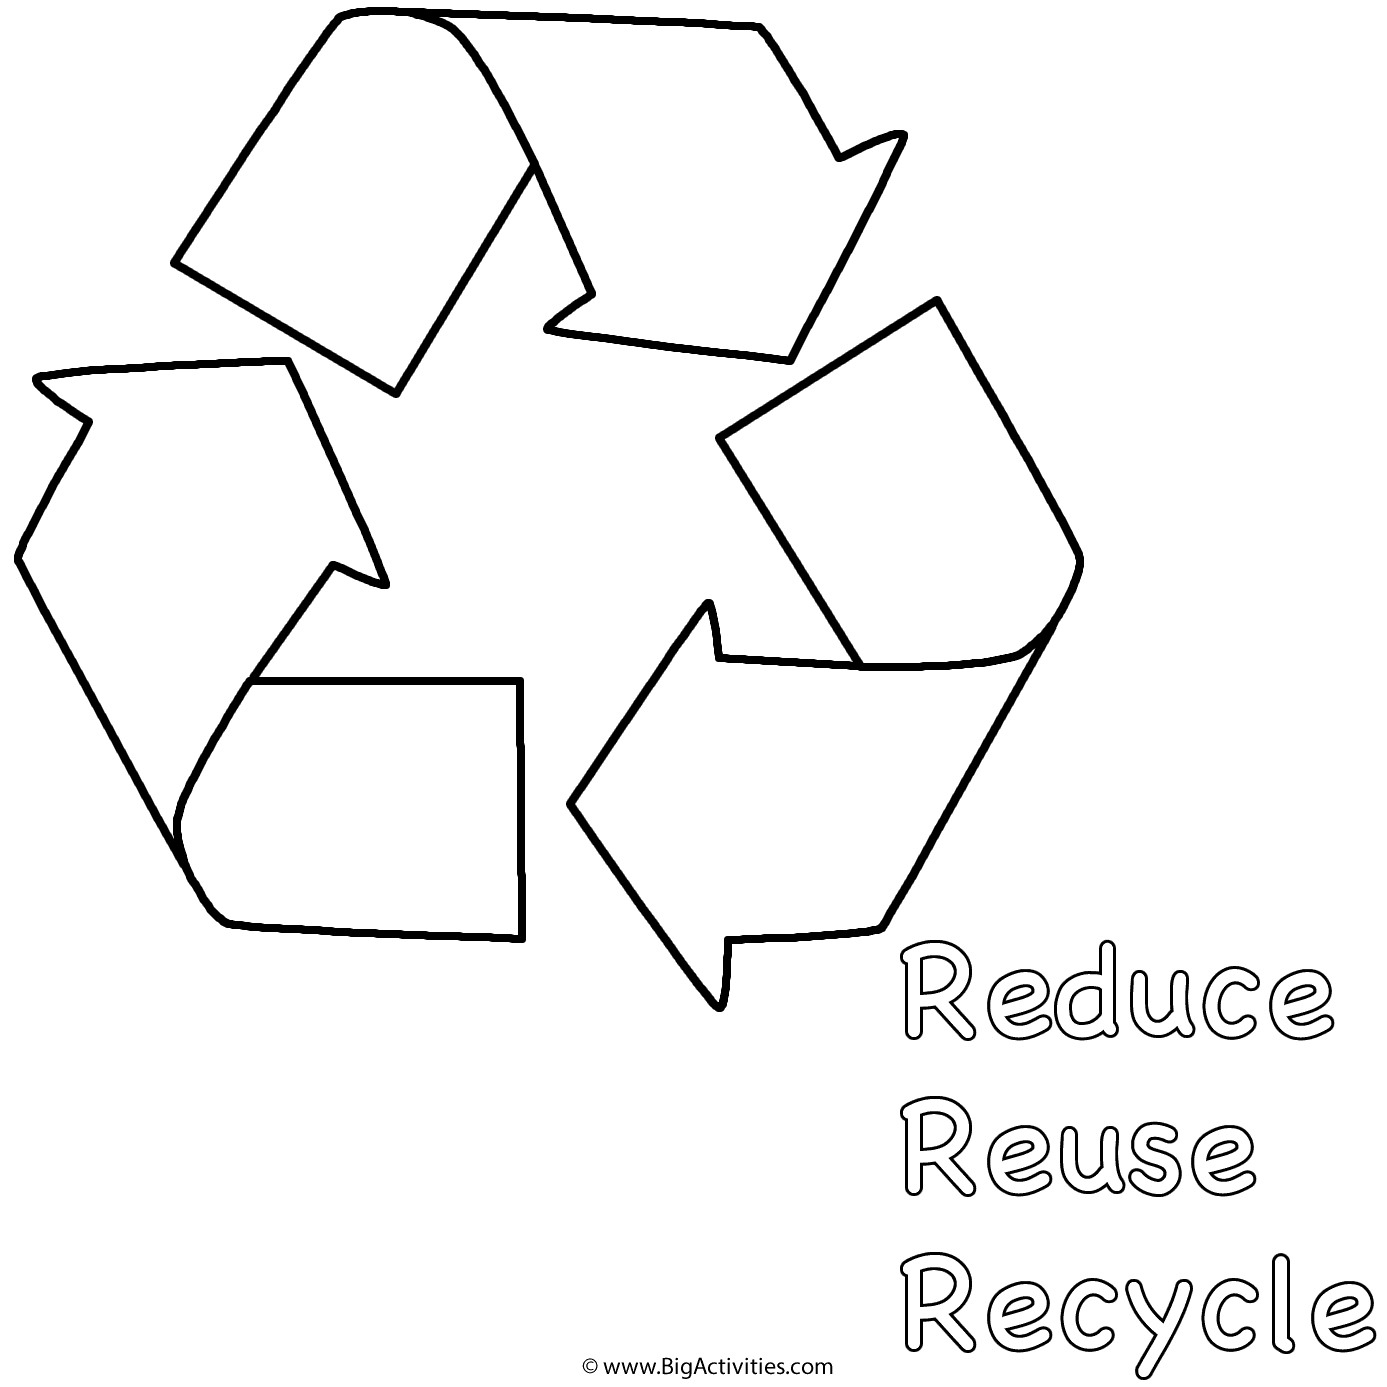 Reduce, Reuse, Recycle below Symbol - Coloring Page (Earth Day)